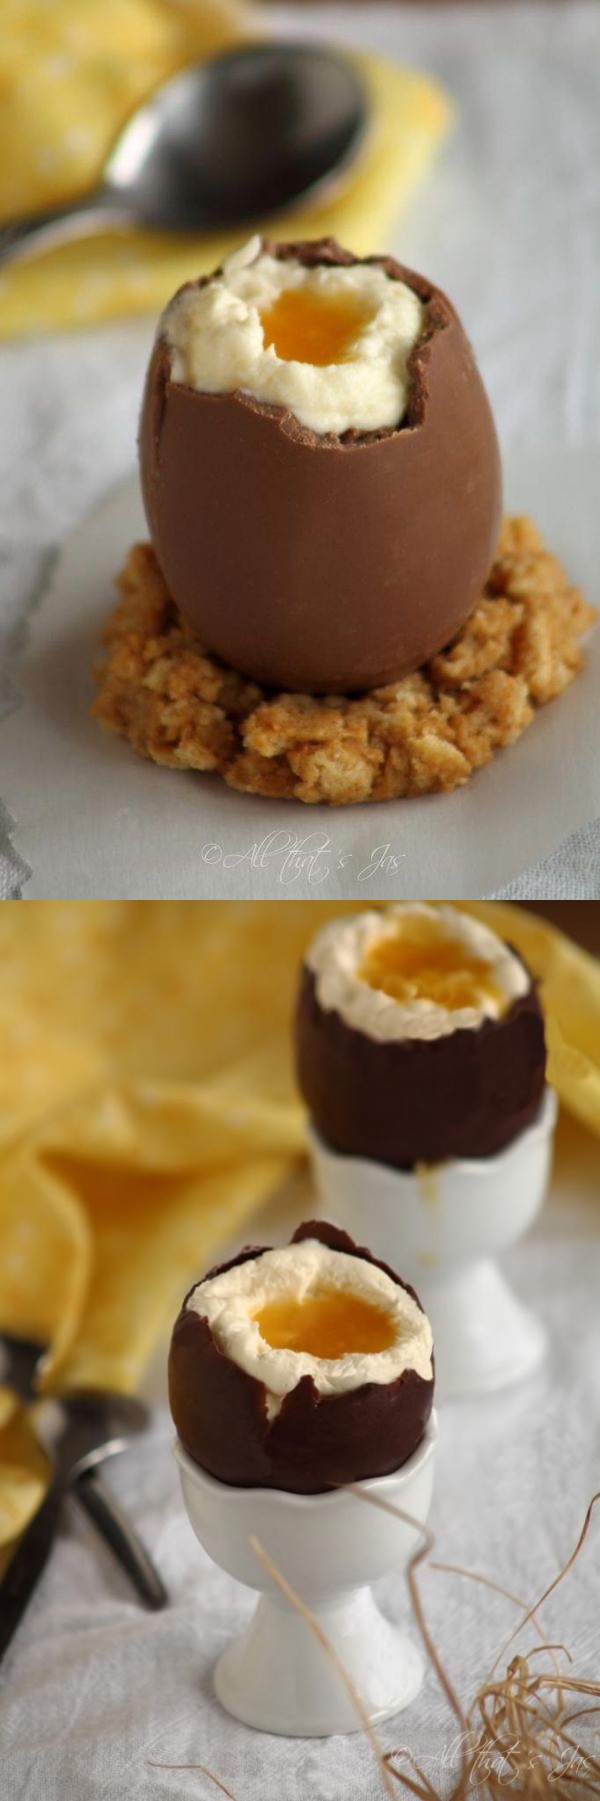 Chocolate Easter Eggs with Cheesecake Filling